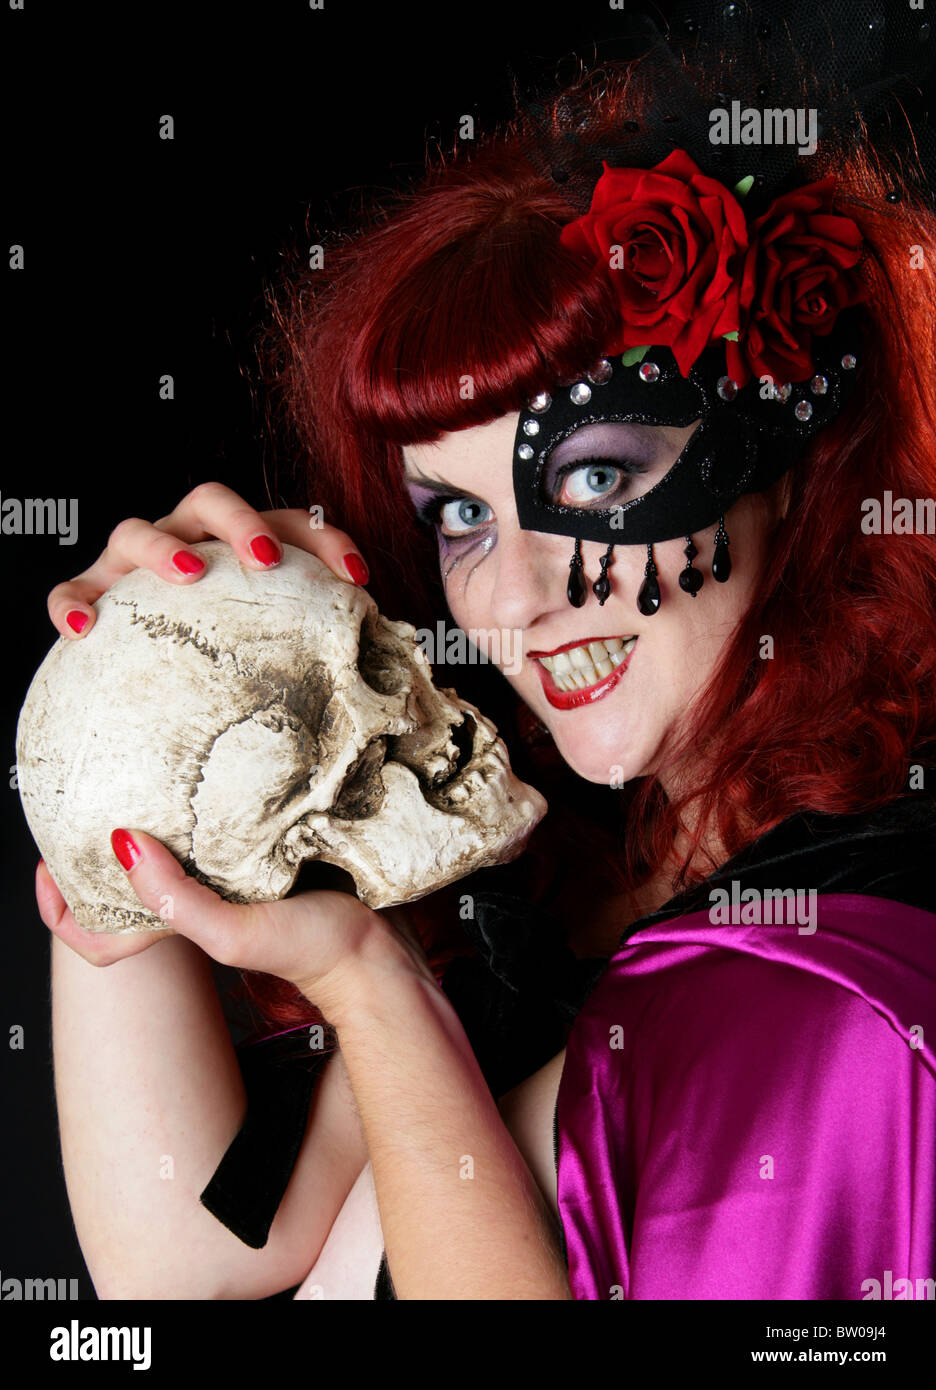 Young Red Headed Woman Wearing a Purple Cape and Sequined Mask Over One Eye and a Red Rose and Holding A Human Skull Stock Photo